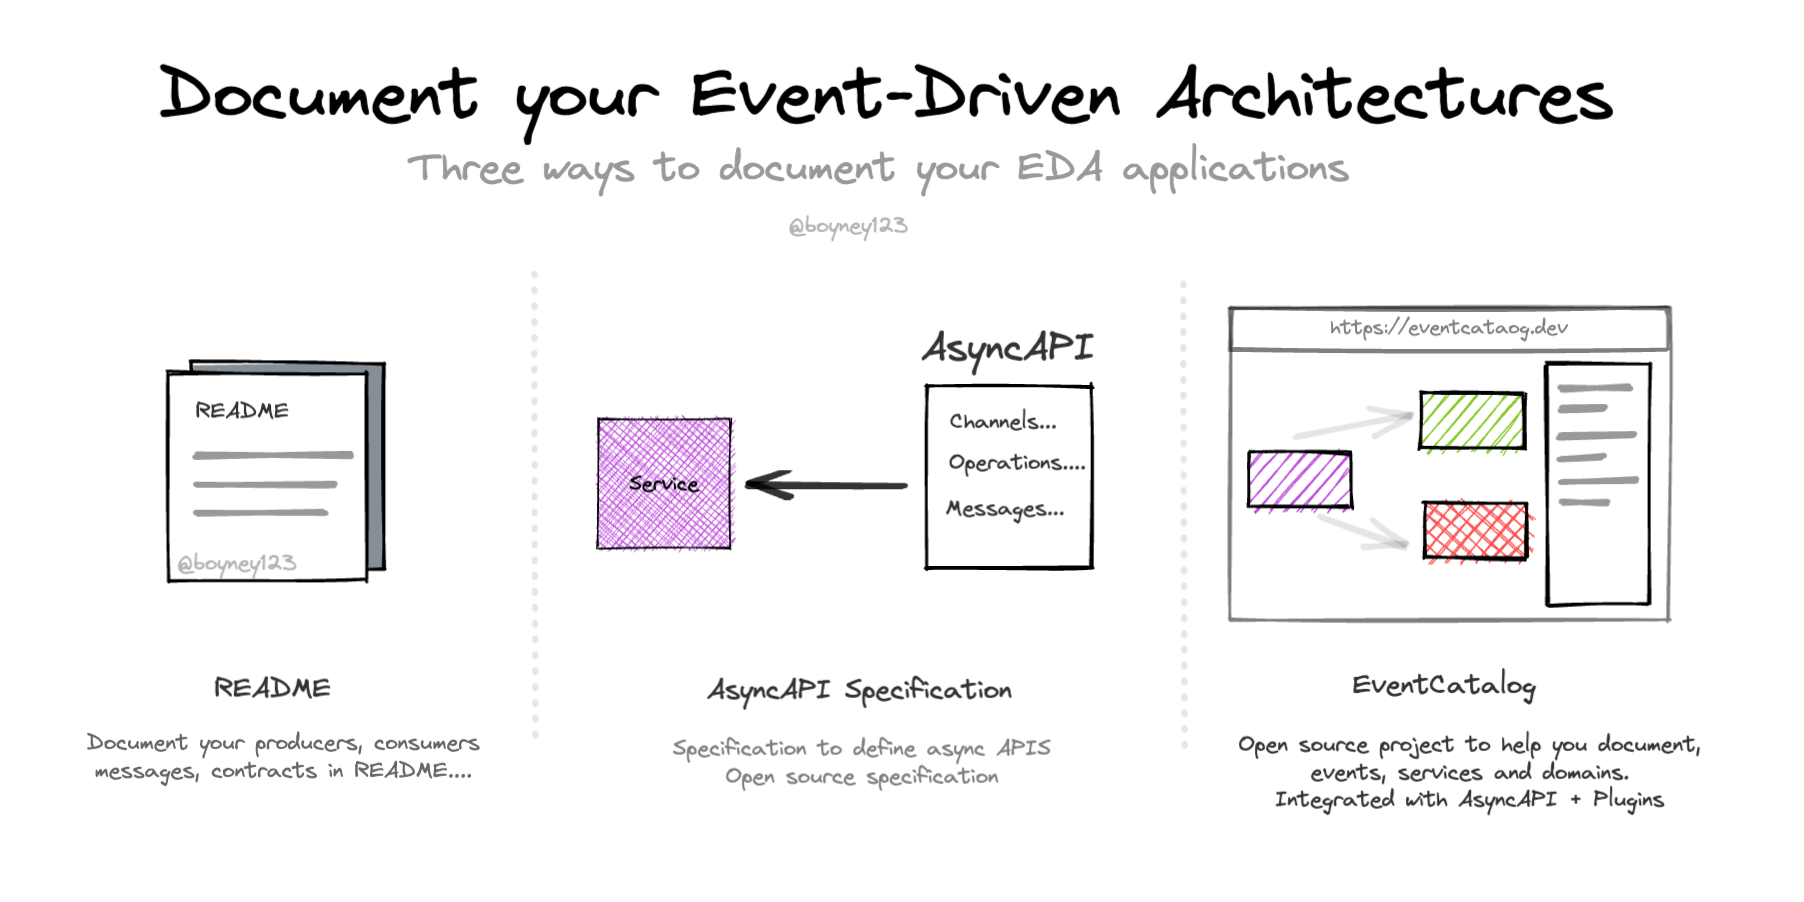 Document your event-driven architecture